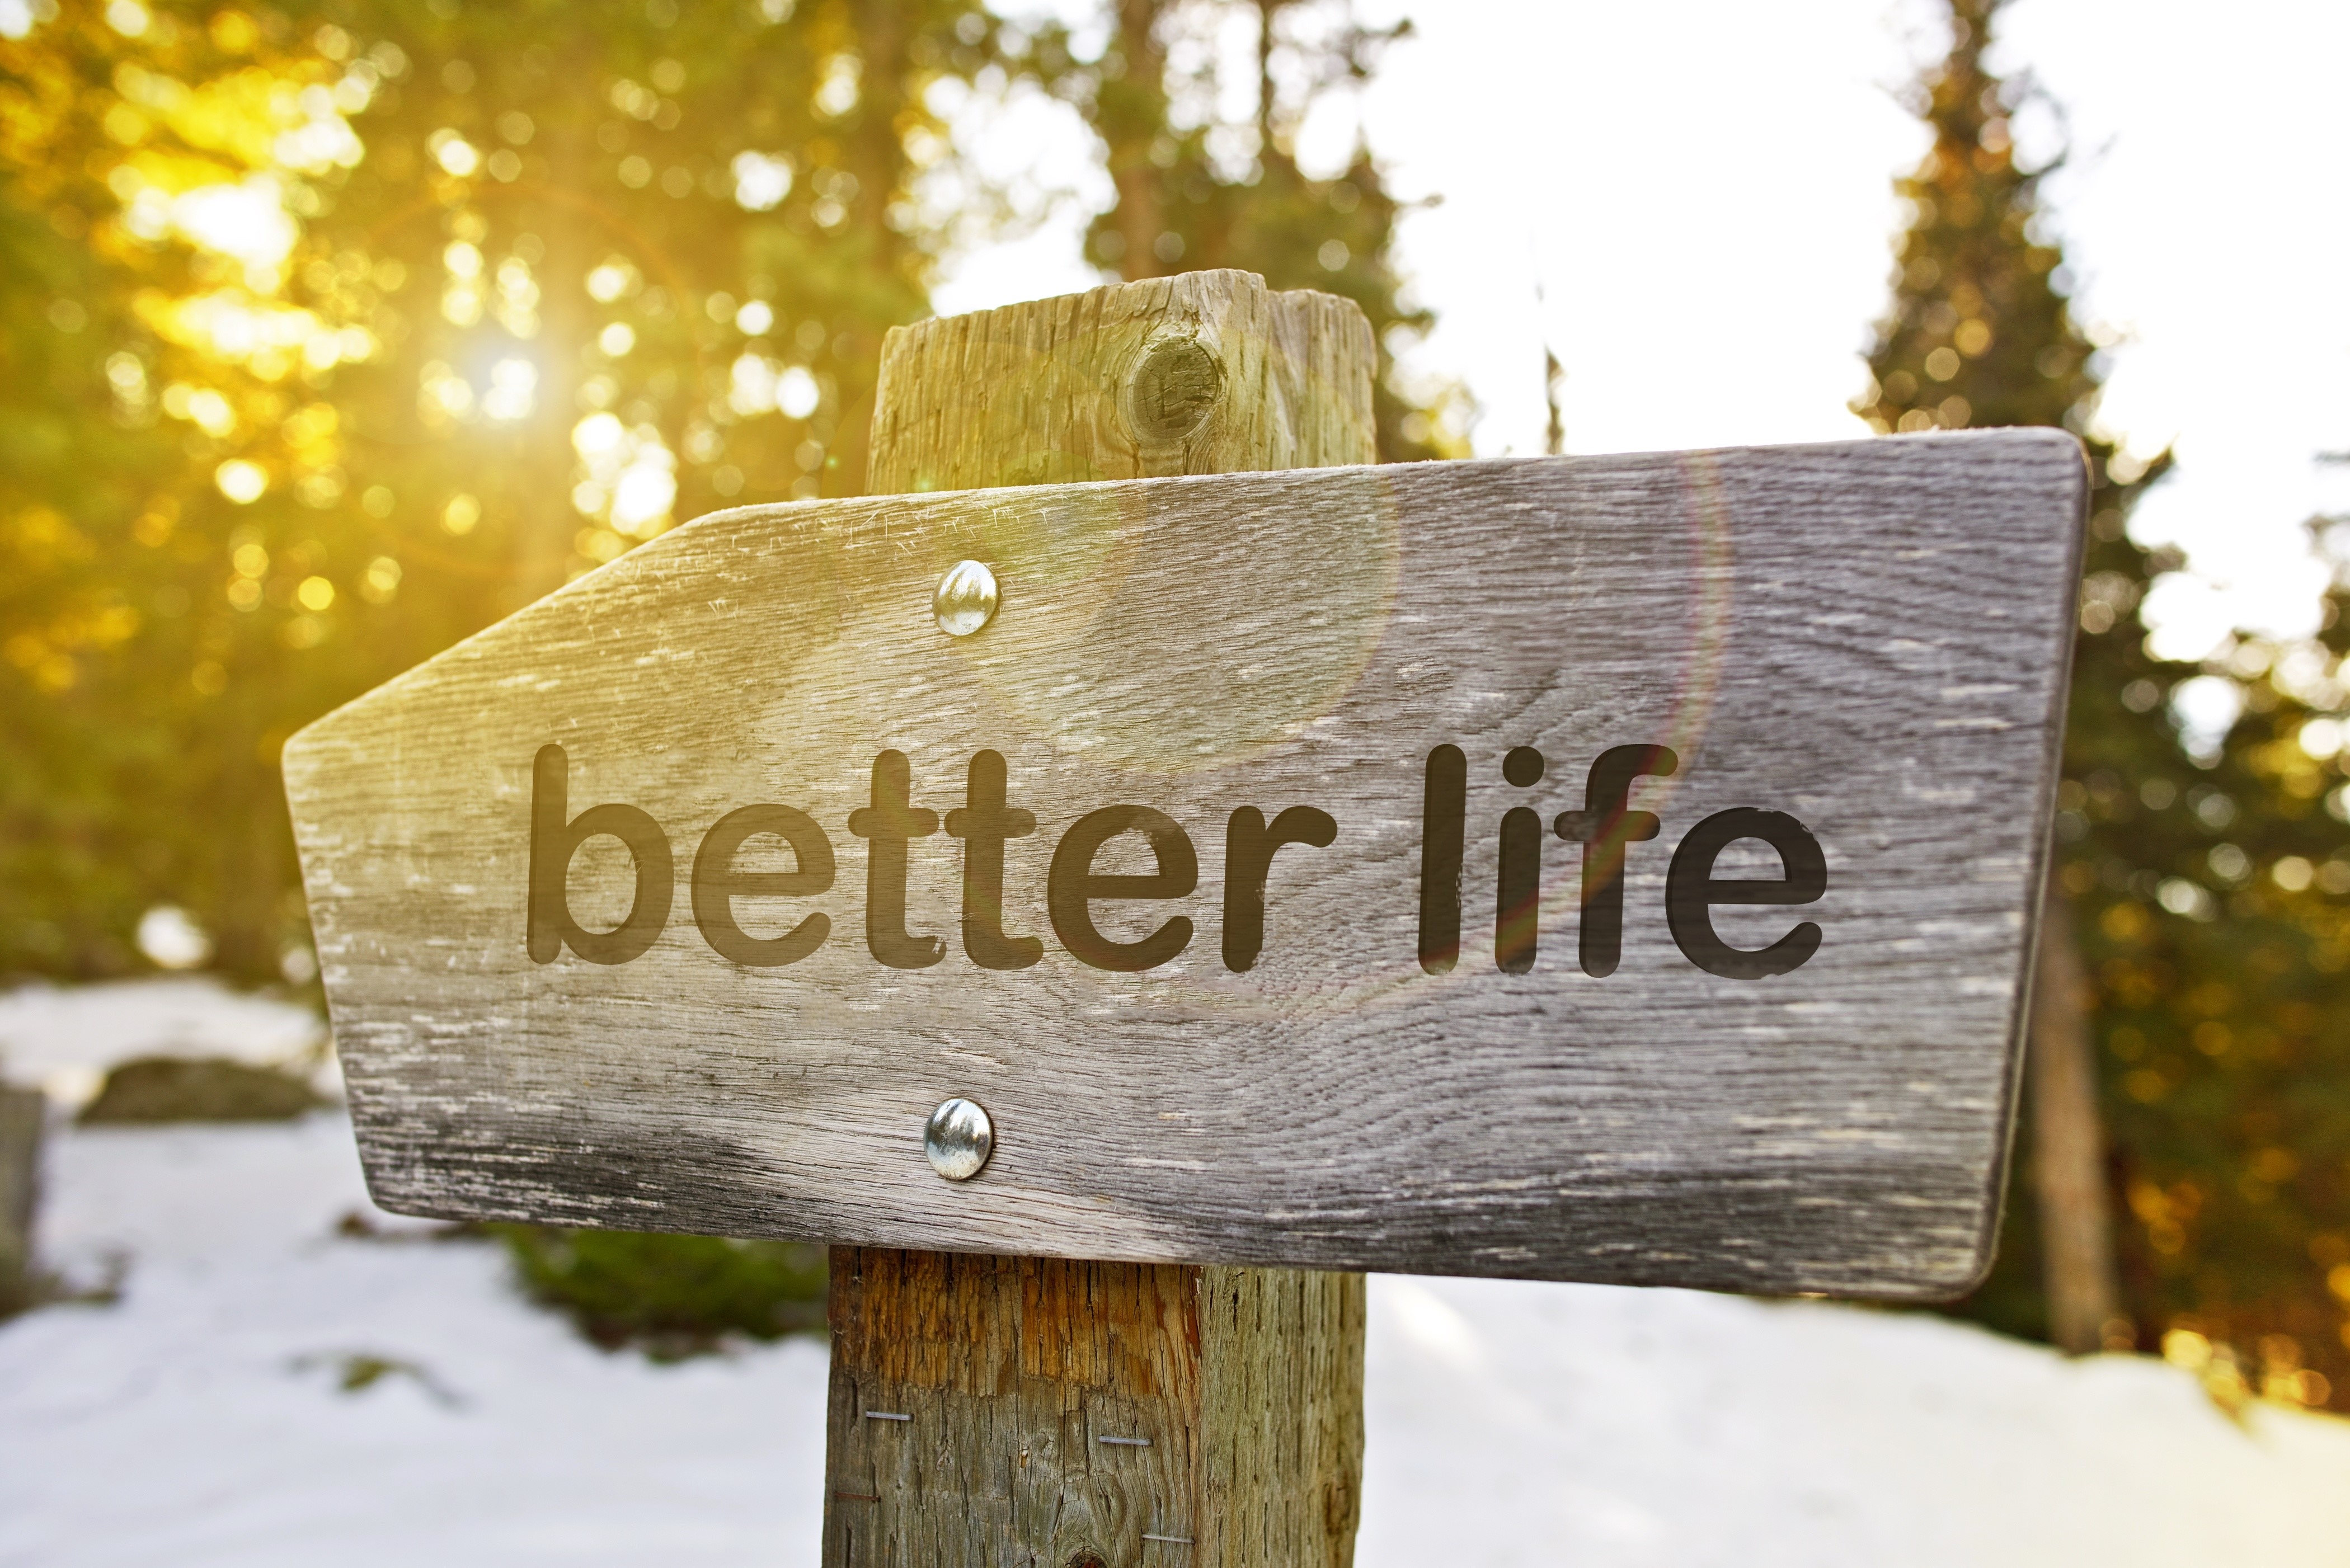 Do your life better. Better Life. Картинку the best of my Life. Do your best to get better картинка. Better than better Life.